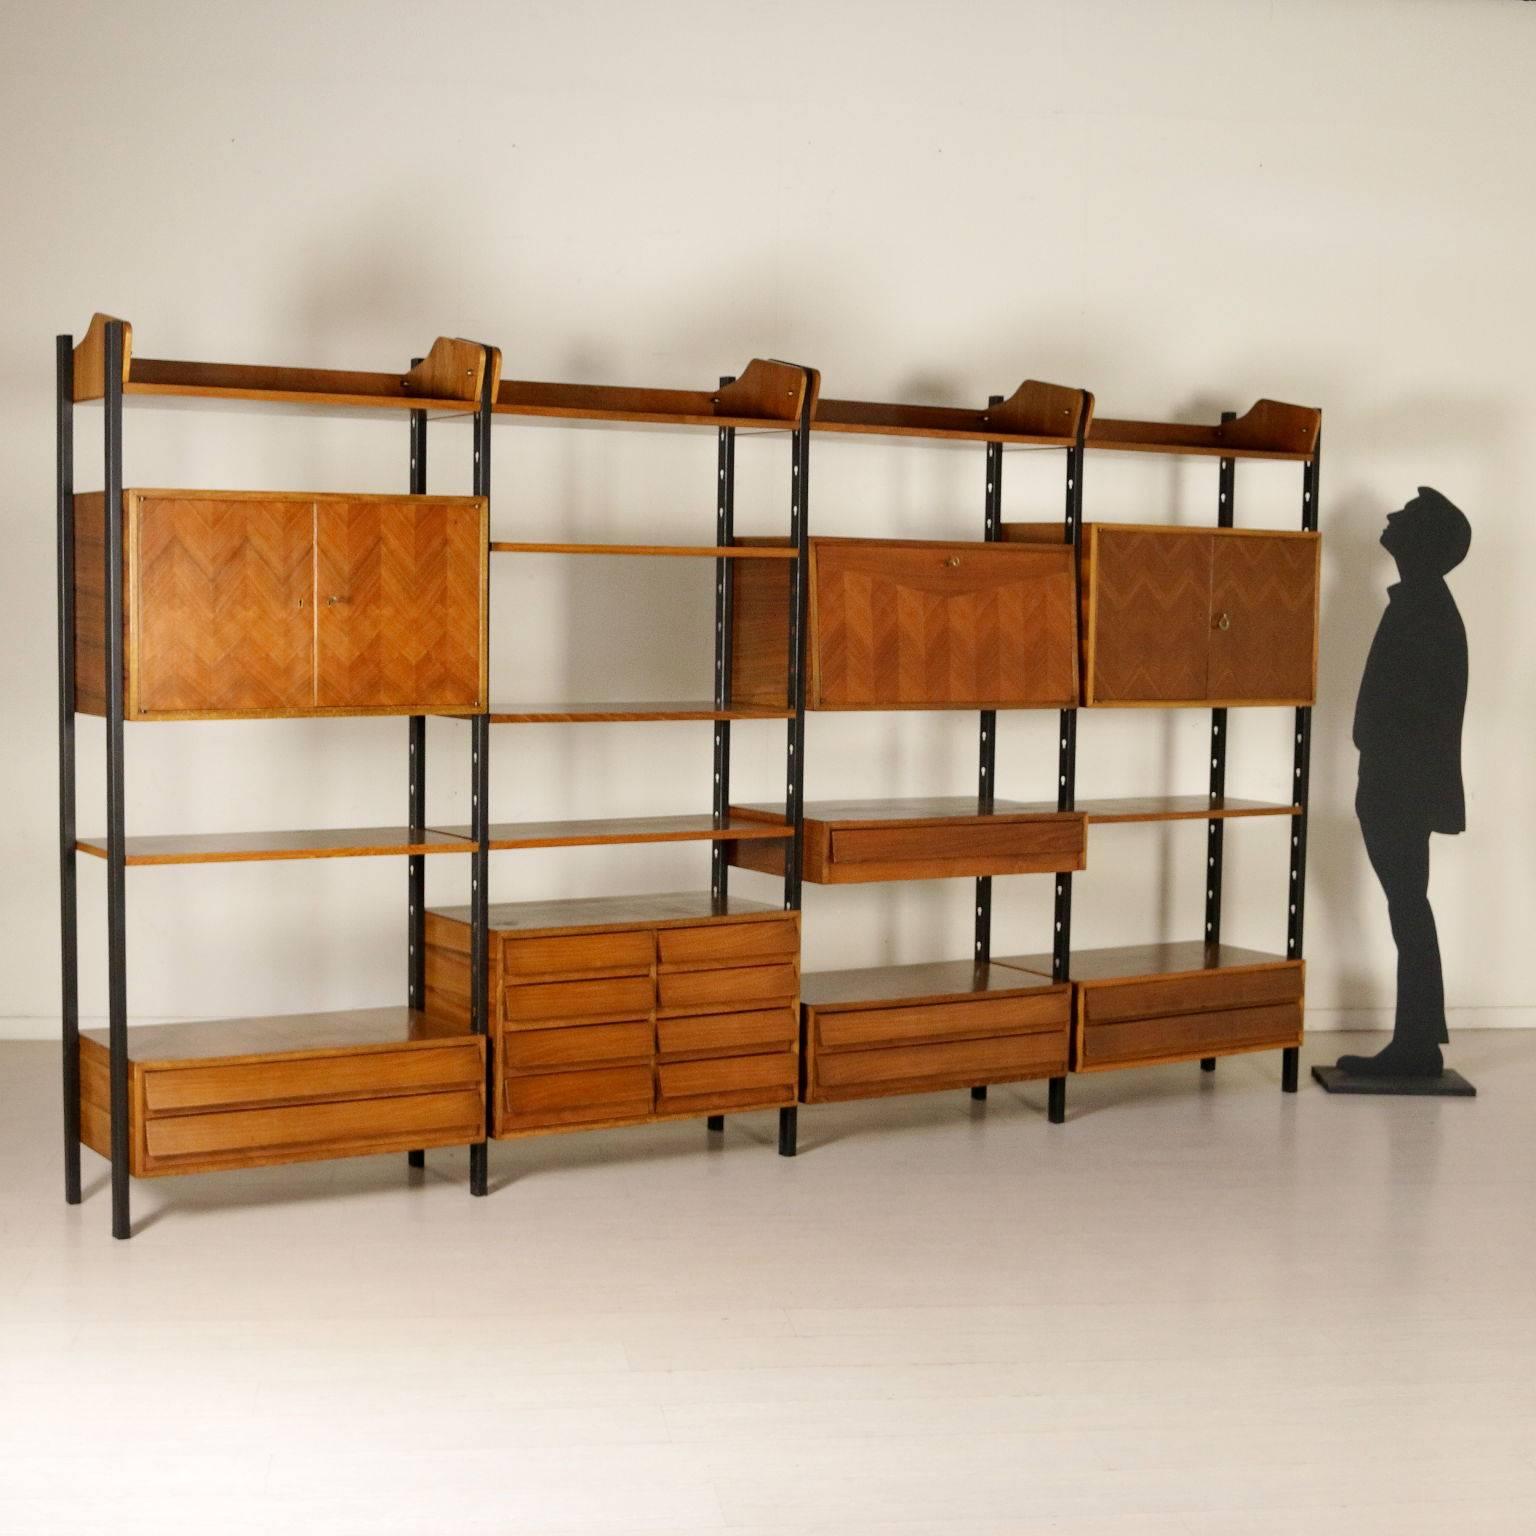 A bookcase with adjustable elements in height. Walnut and rosewood veneer, metal uprights. Manufactured in Italy, 1950s-1960s.